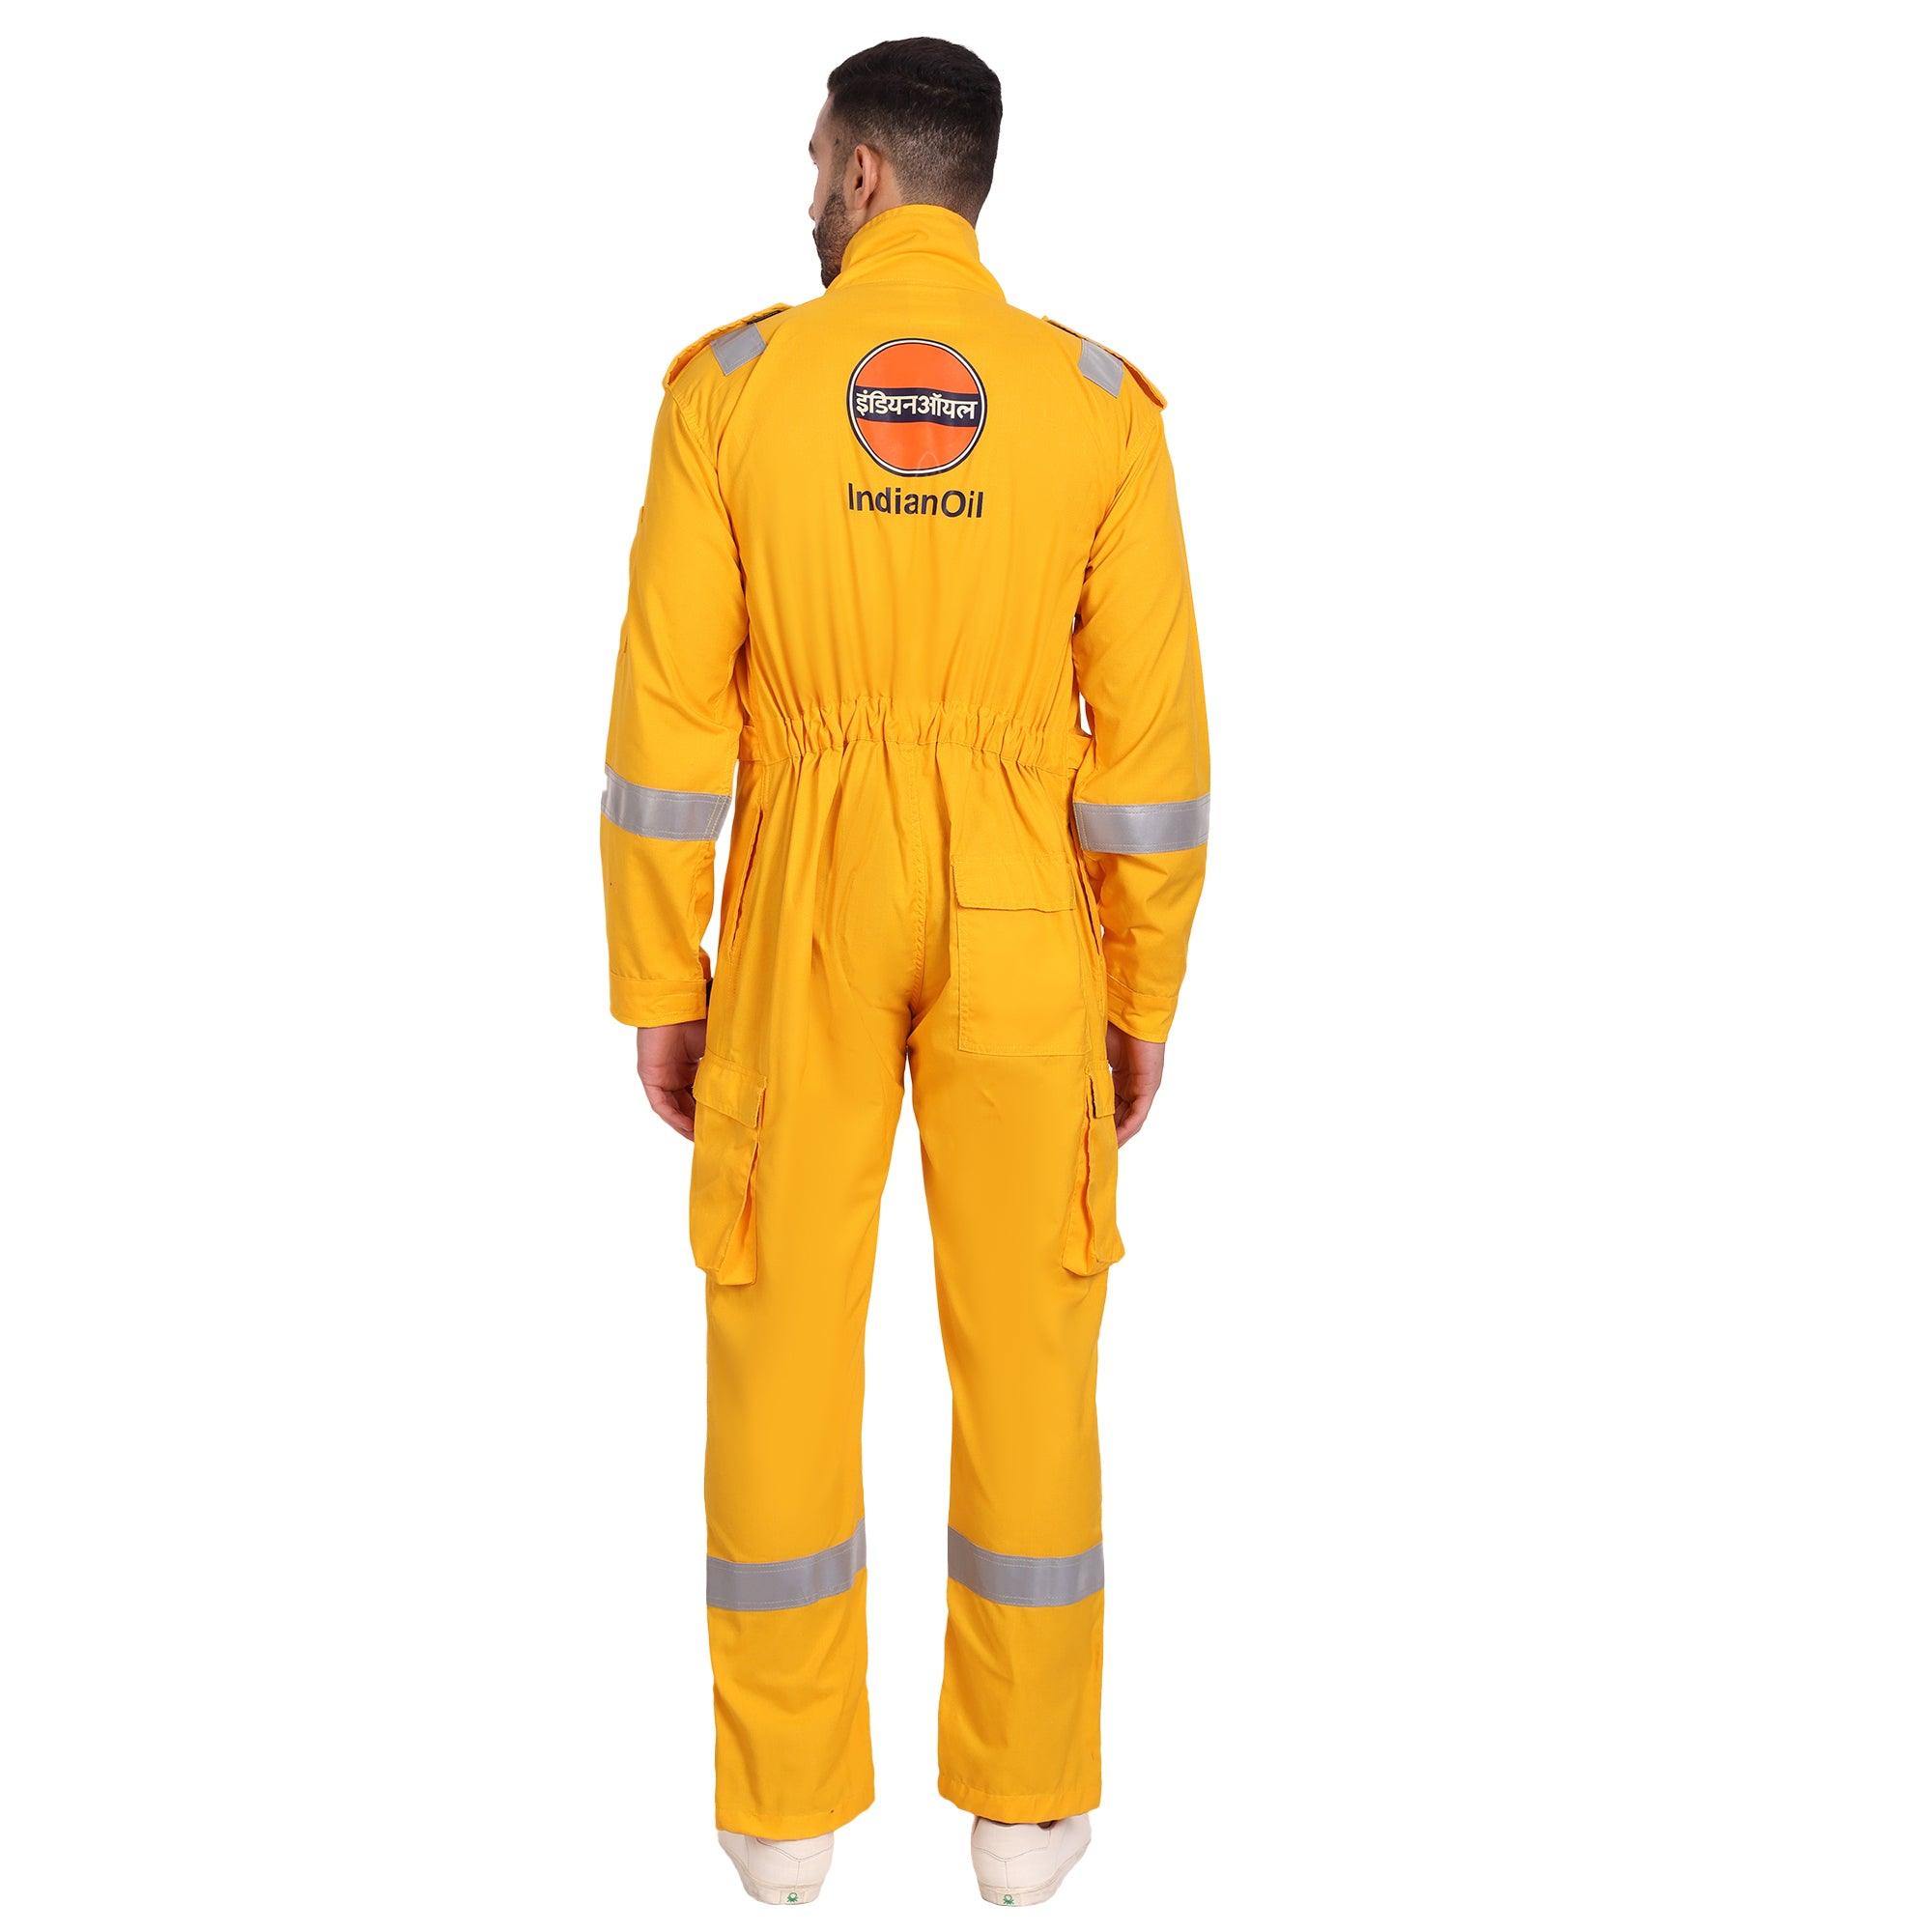 Buy Right Disposable Coverall: Consider Style, Material, Options, and Env.